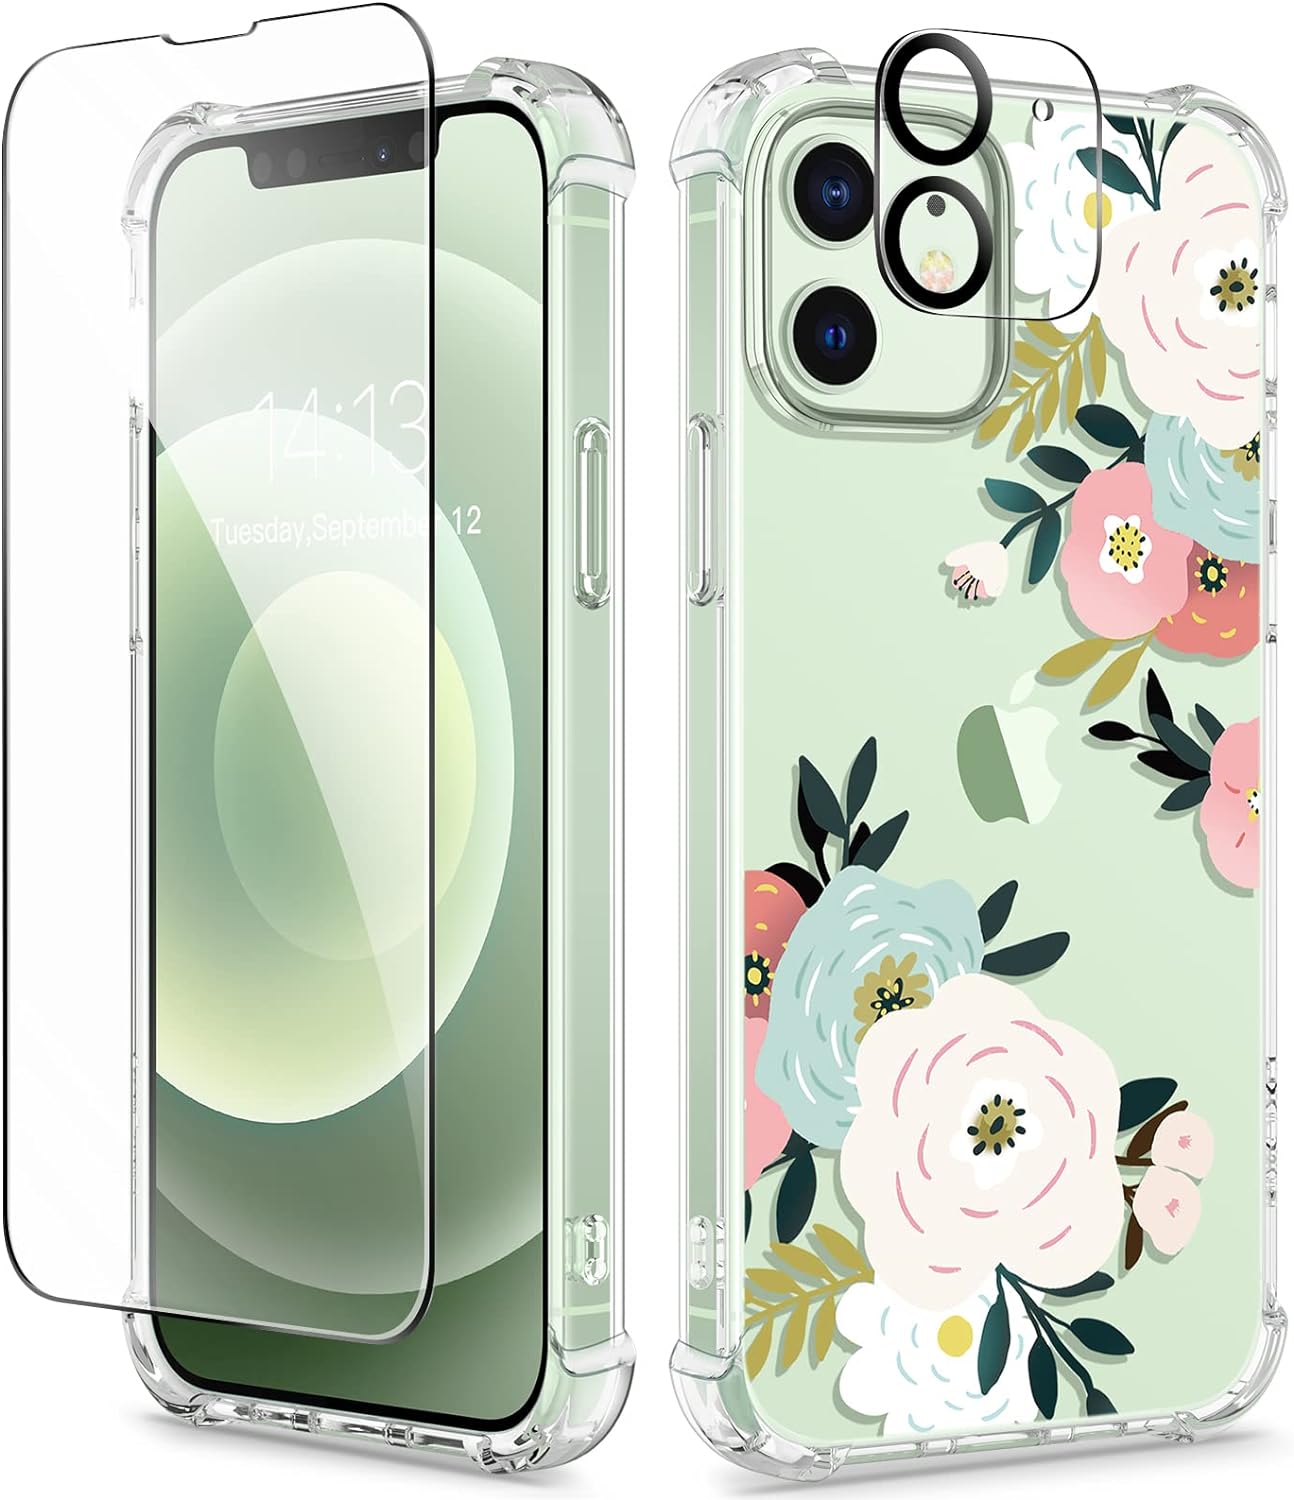 GVIEWIN for iPhone 12 Case and iPhone 12 Pro Case with Screen Protector + Camera Lens Protector, Clear Floral Flexible TPU Shockproof Women Girls Flower Phone Case 6.1(Abundant Blossom/White)